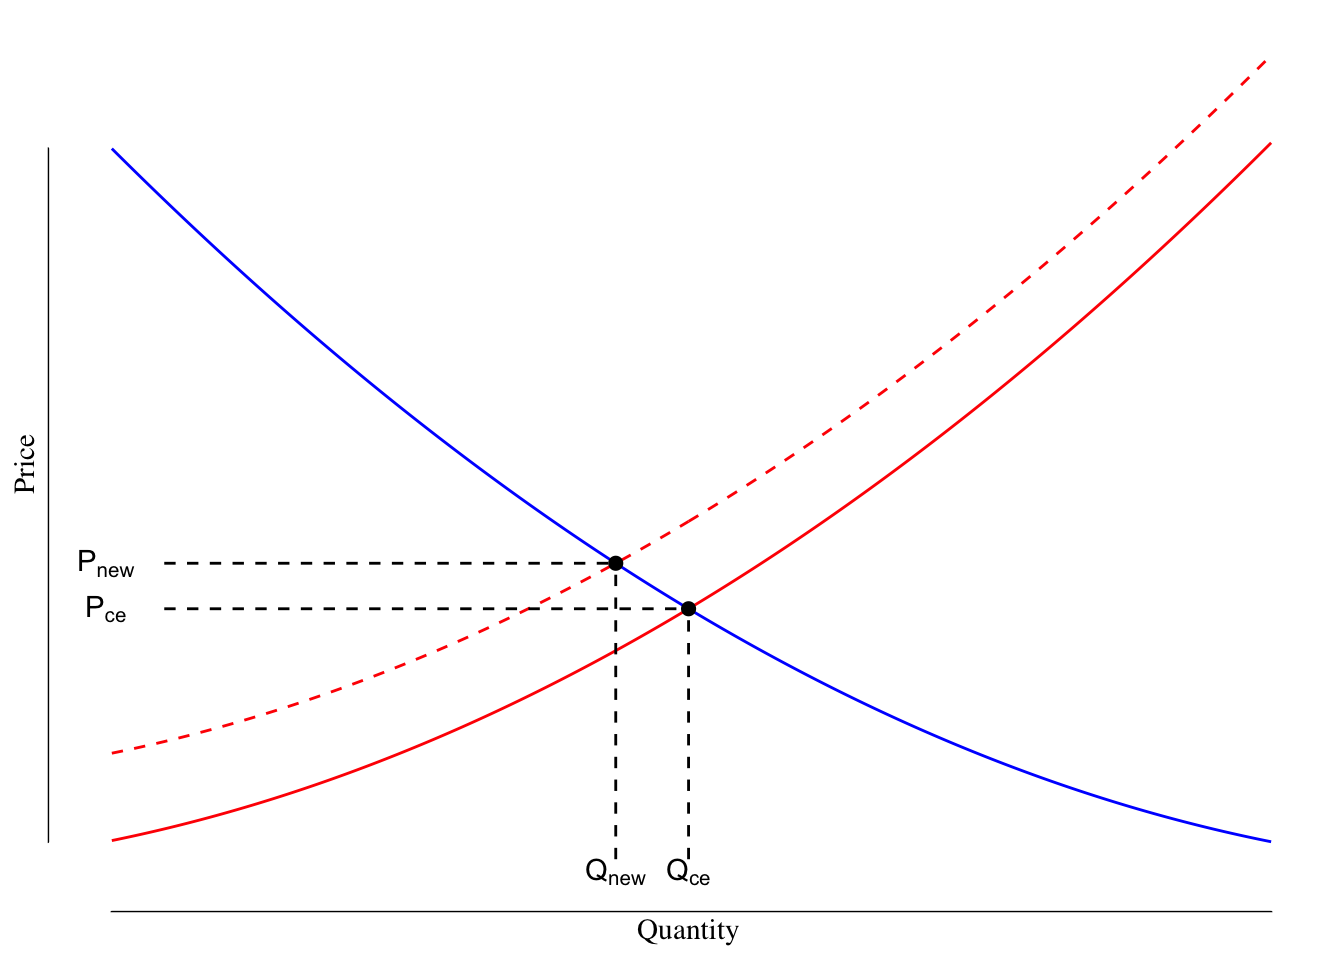 Supply and Demand Curves With Increased Marginal Costs of Production. The first supply line is shown in red while the shifted supply line is shown as a dashed red line. The demand line is shown as a solid blue line.